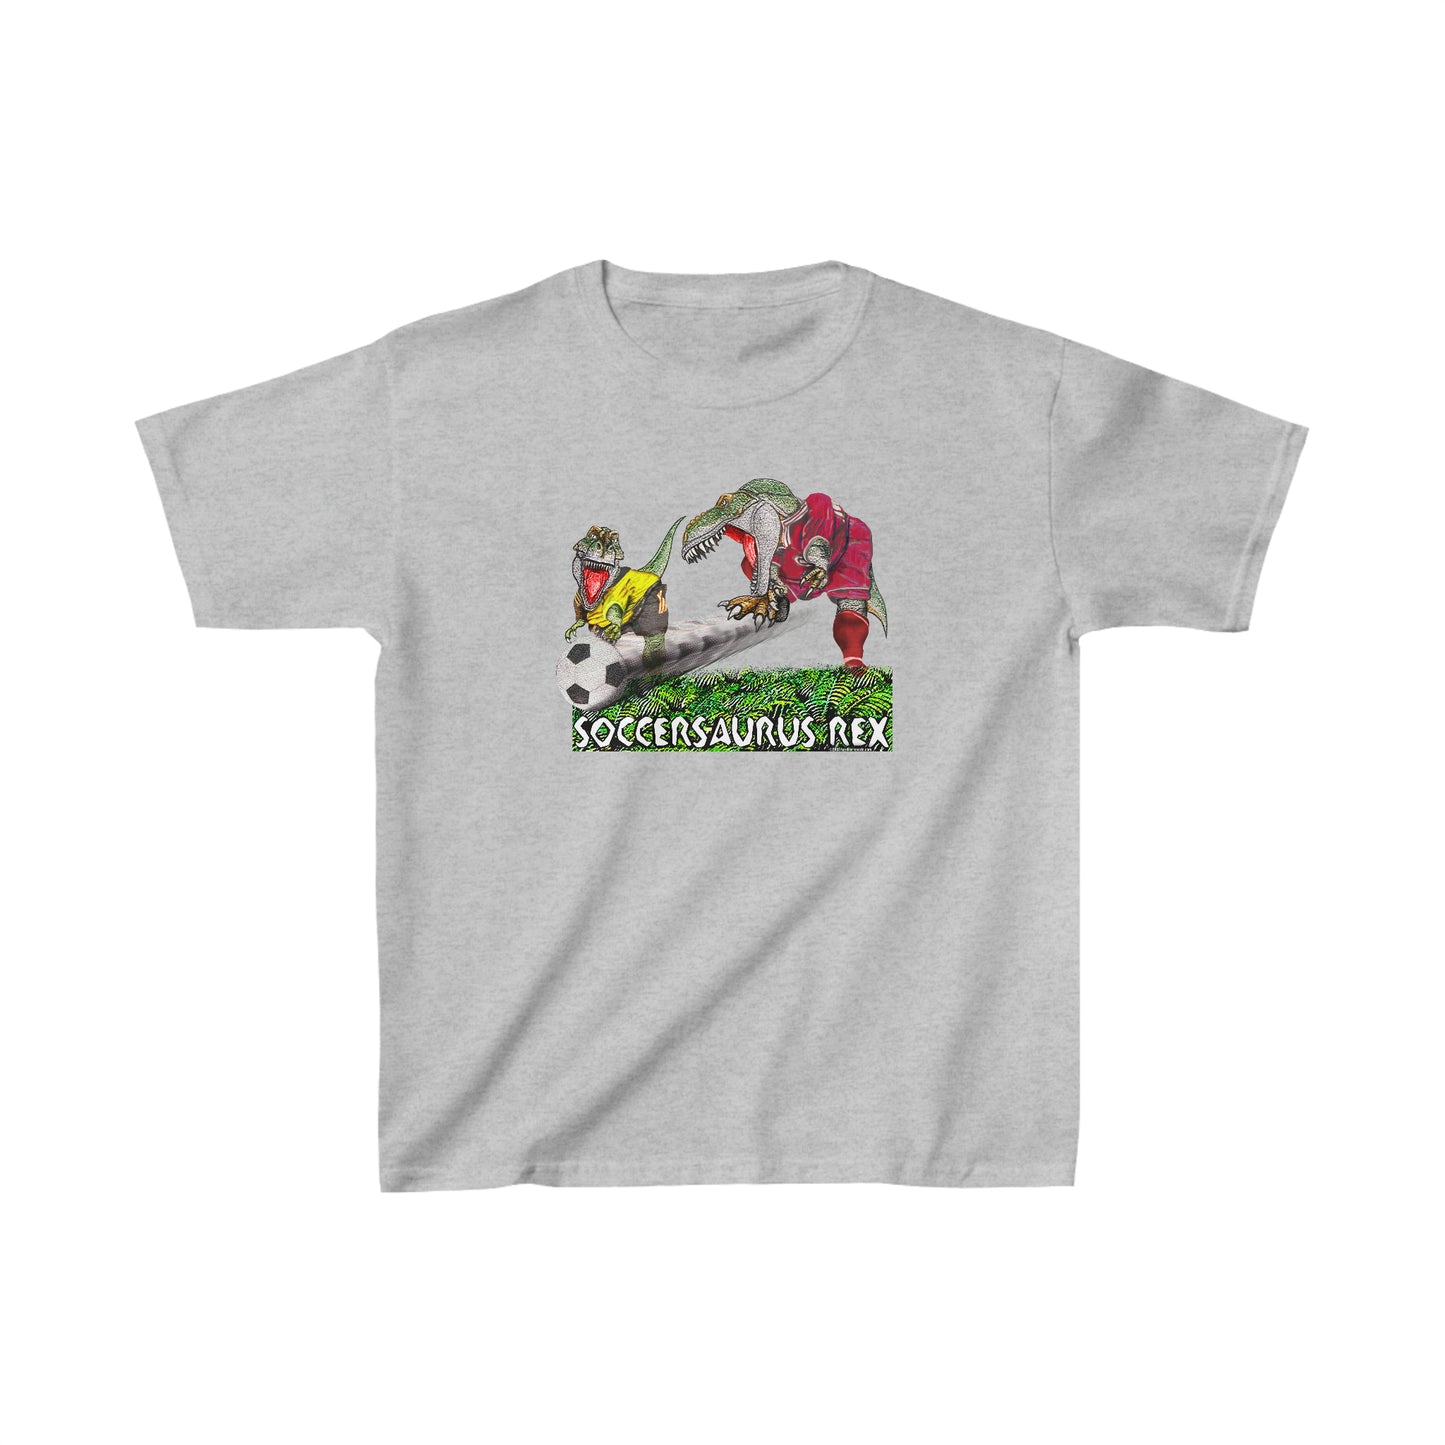 Soccersaurus Rex, Soccer Playing T-Rex Dinosaurs, Playin Soccer in Red and Yellow Jerseys, Funny Soccer T, Youth kids tee, Soccer Dino